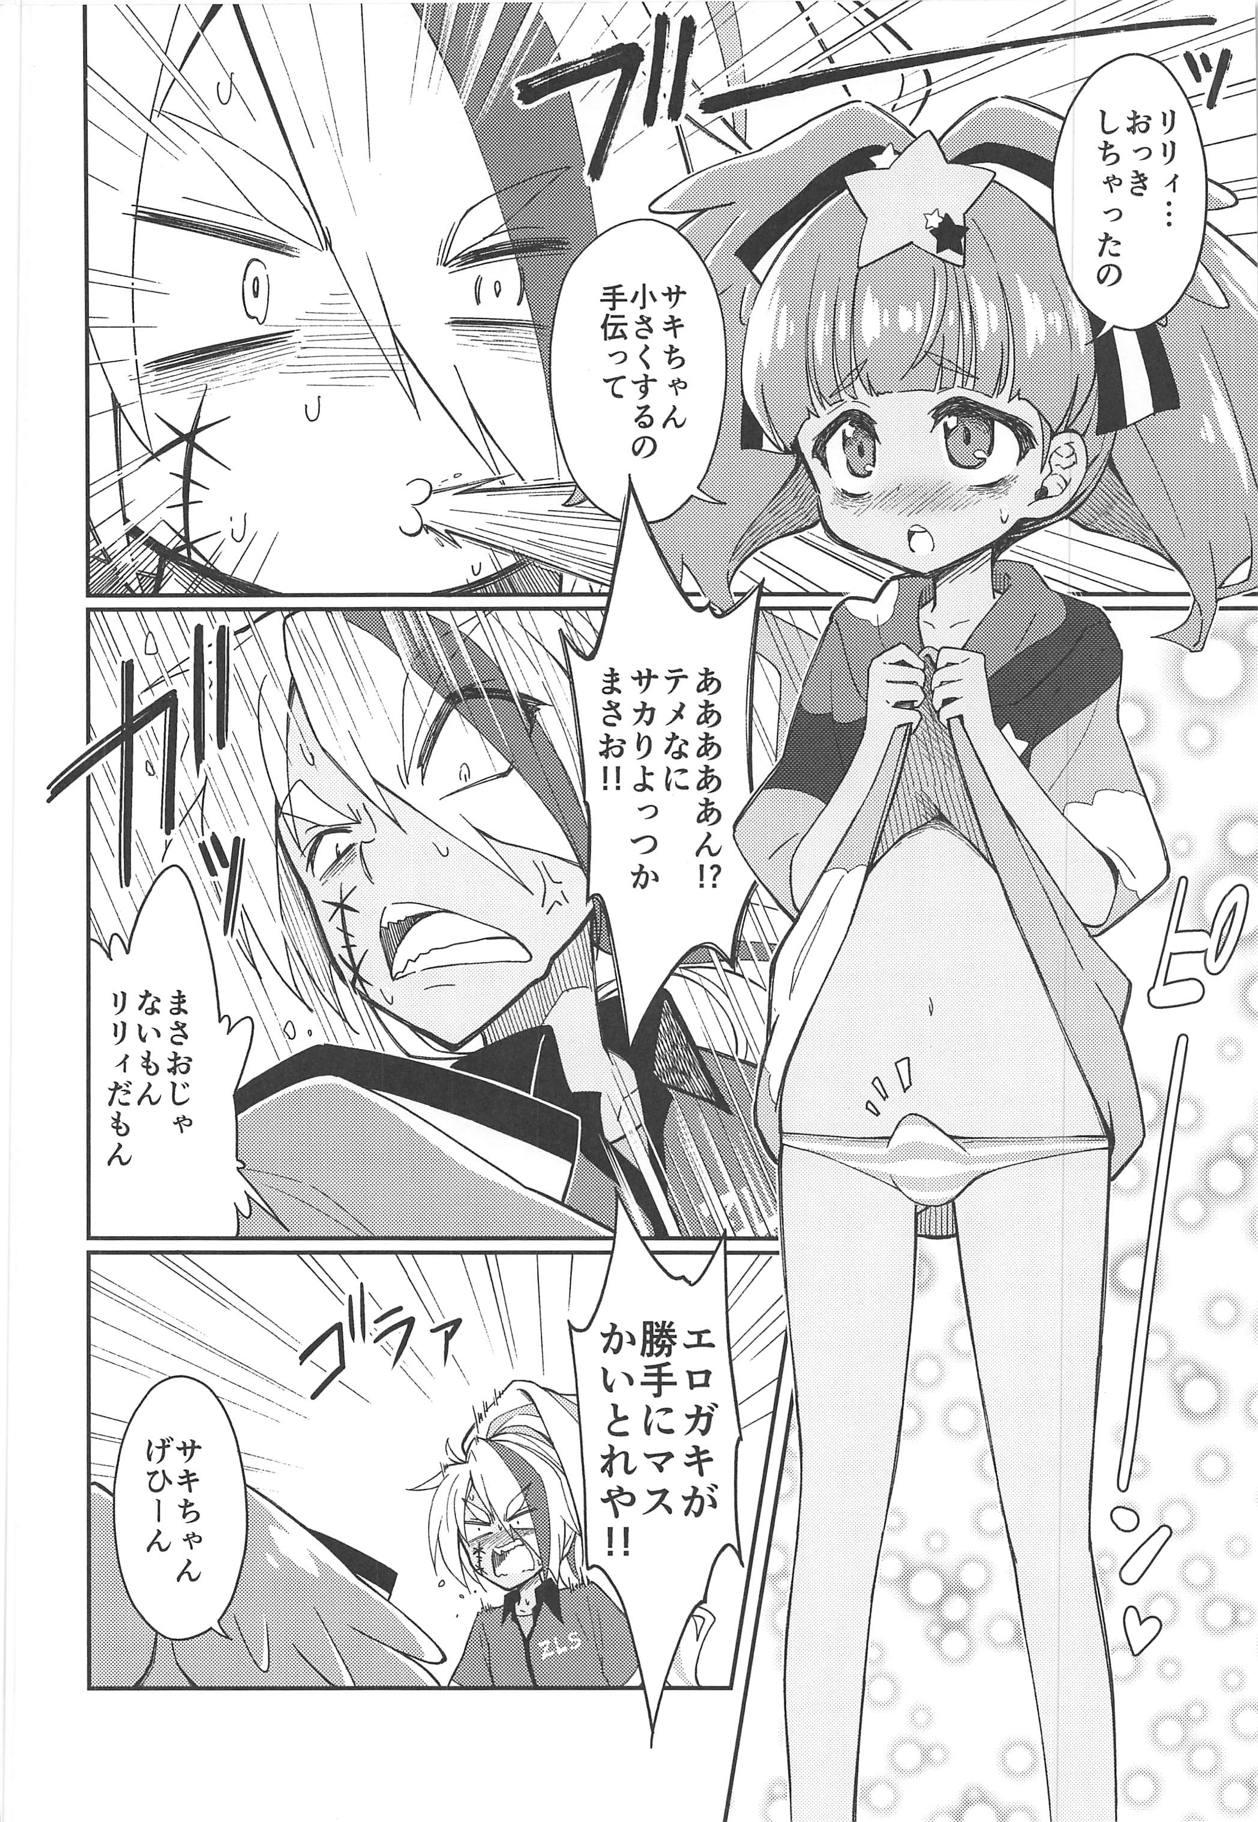 Mommy Lovely Girls' Lily Vol. 18 - Zombie land saga Skirt - Page 4